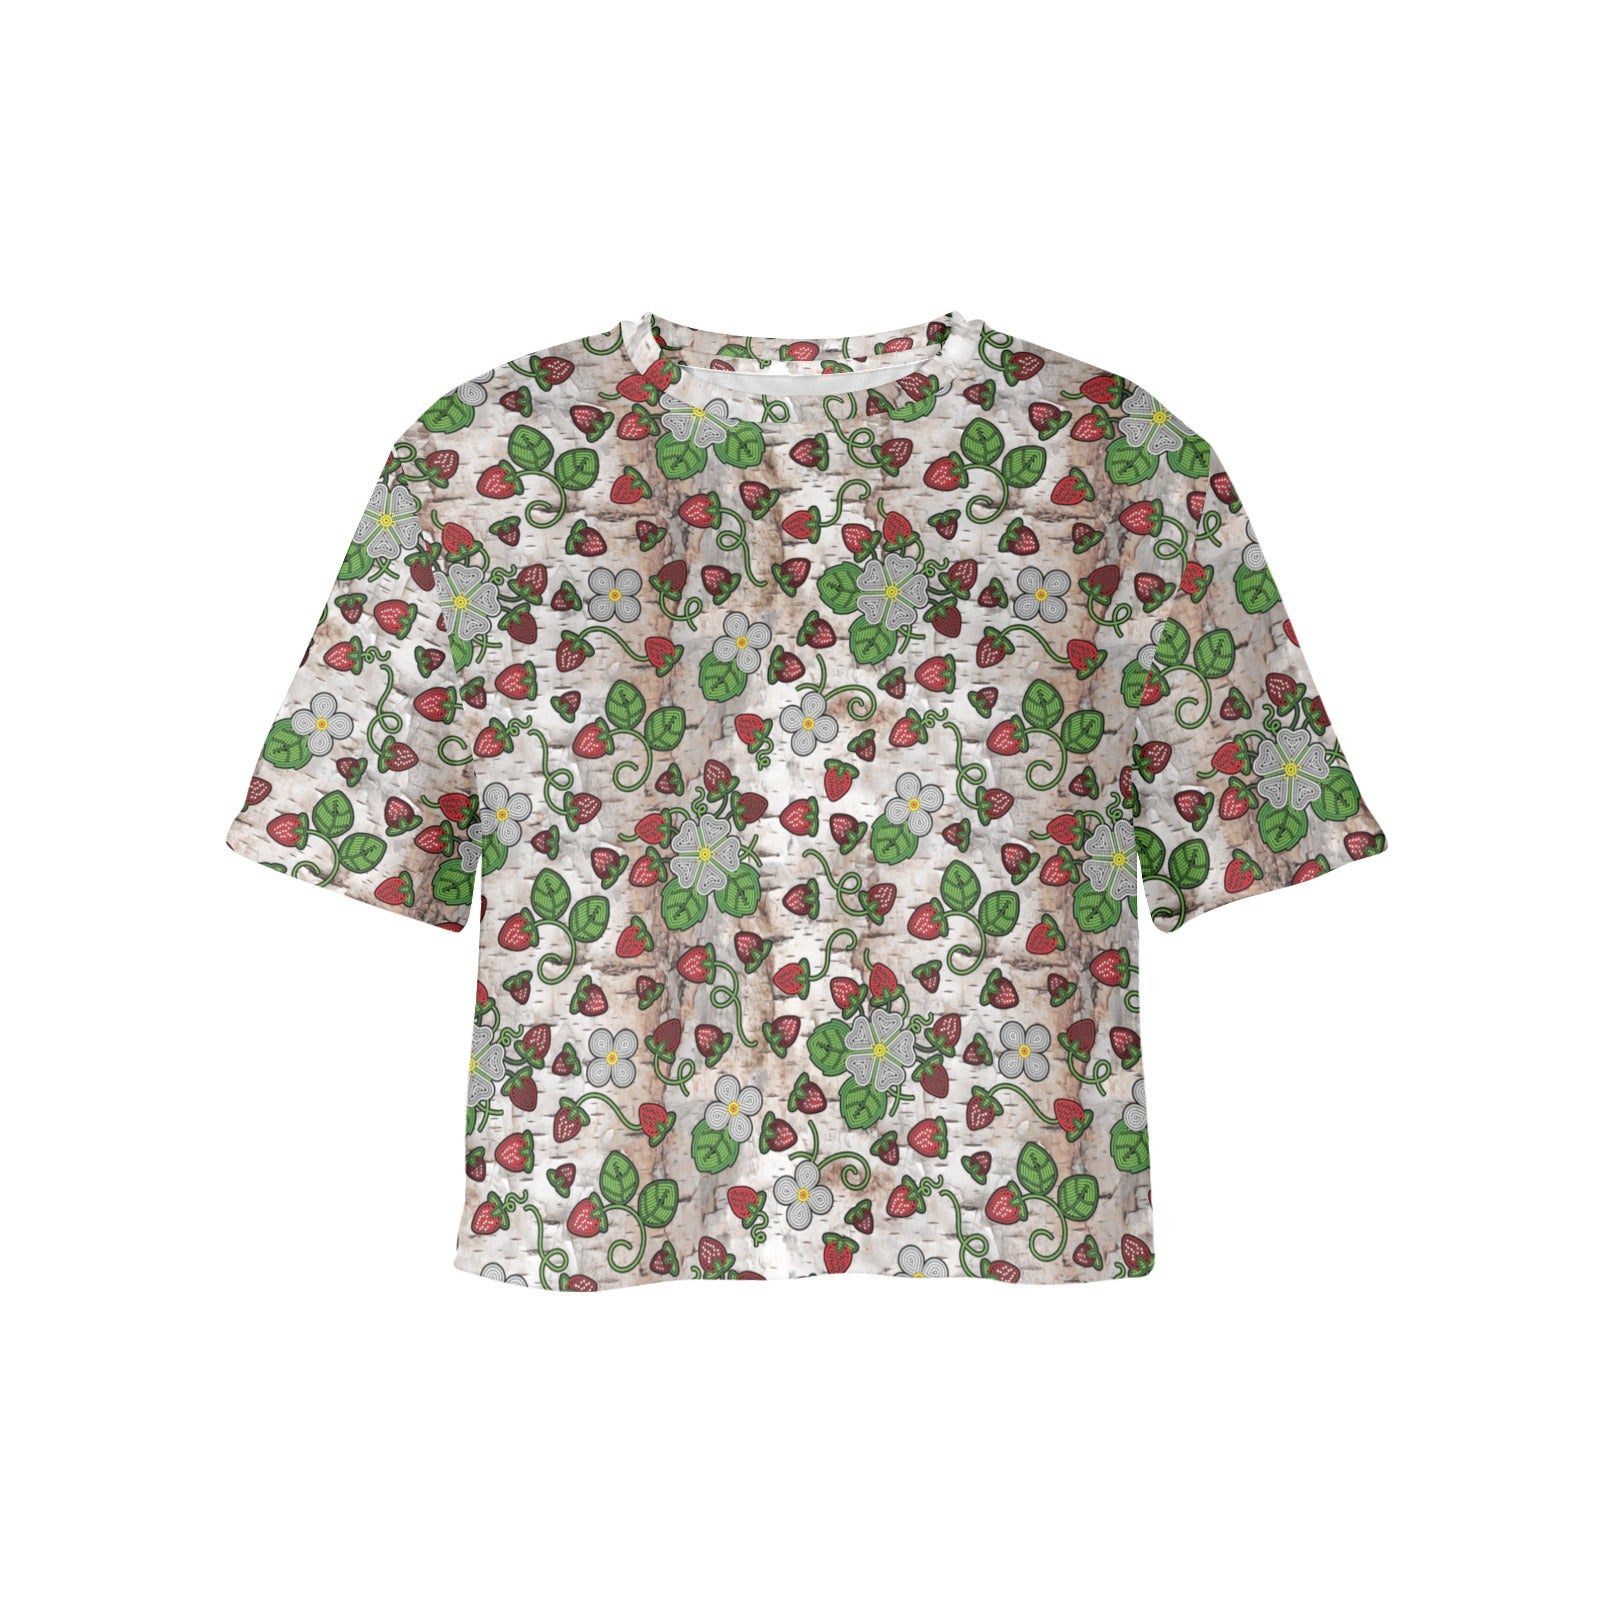 Strawberry Dreams Br Bark Women's Cropped T-shirt